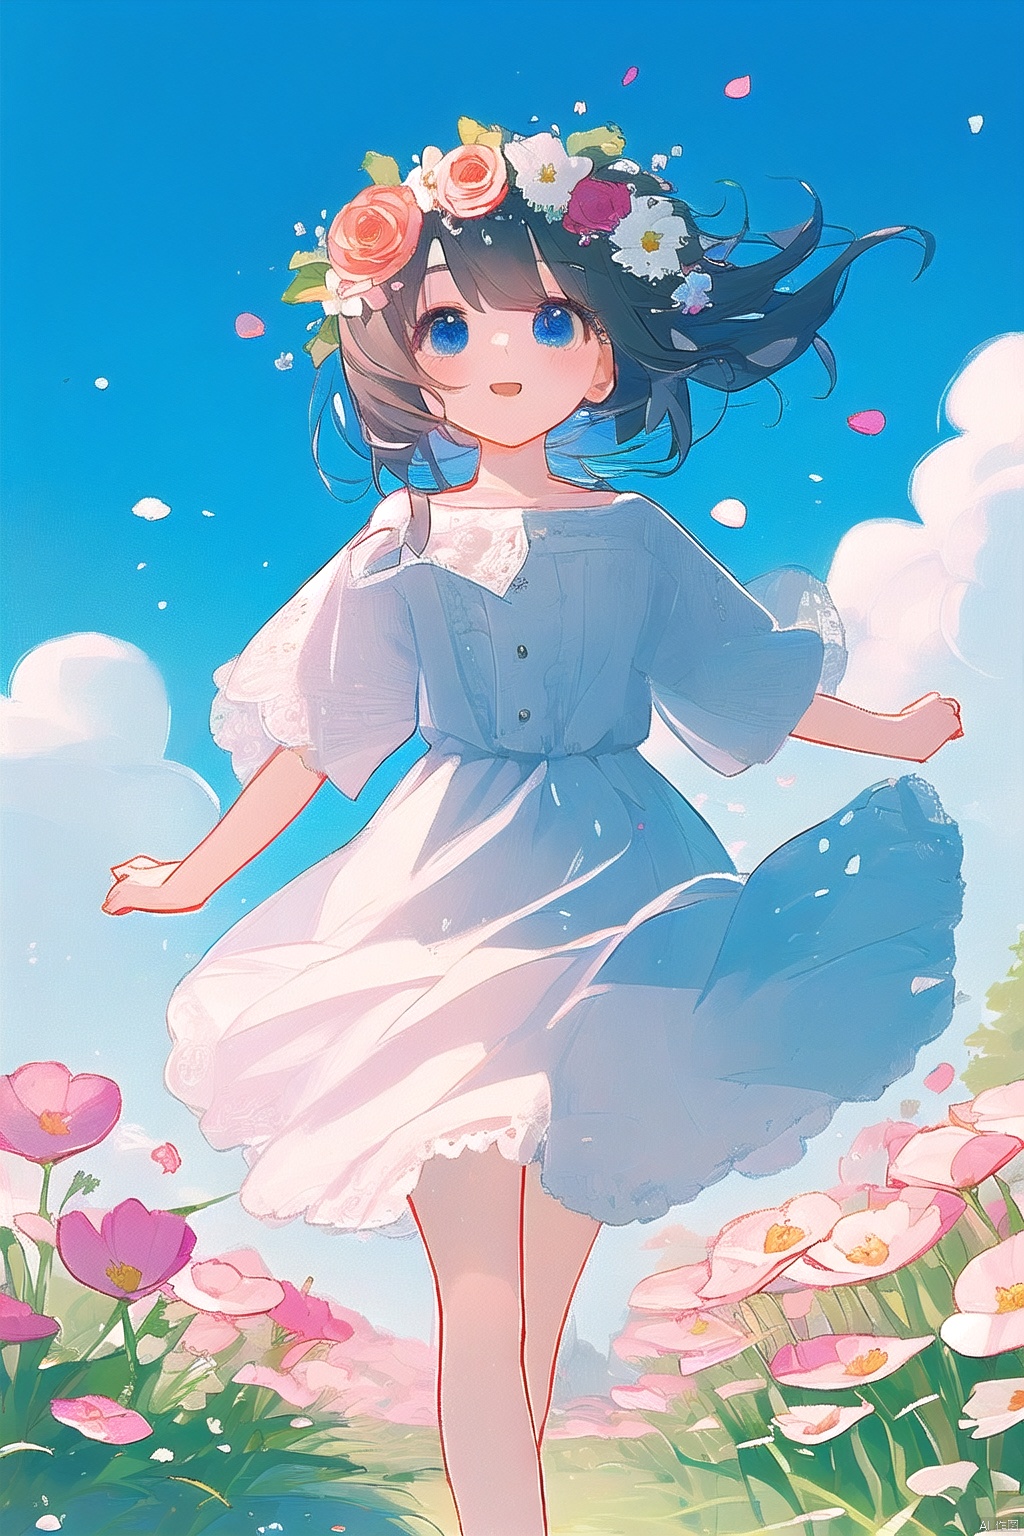 A lovely young girl, surrounded by vibrant flowers, runs with abandon in a lush field, bouquet held tight to her chest. A delicate flower wreath adorns her head, while her short white skirt billows behind, petals dancing in the gentle breeze. Against the brilliant blue sky and puffy white clouds, she radiates joy, her loli charm captivating as she moves with carefree abandon.